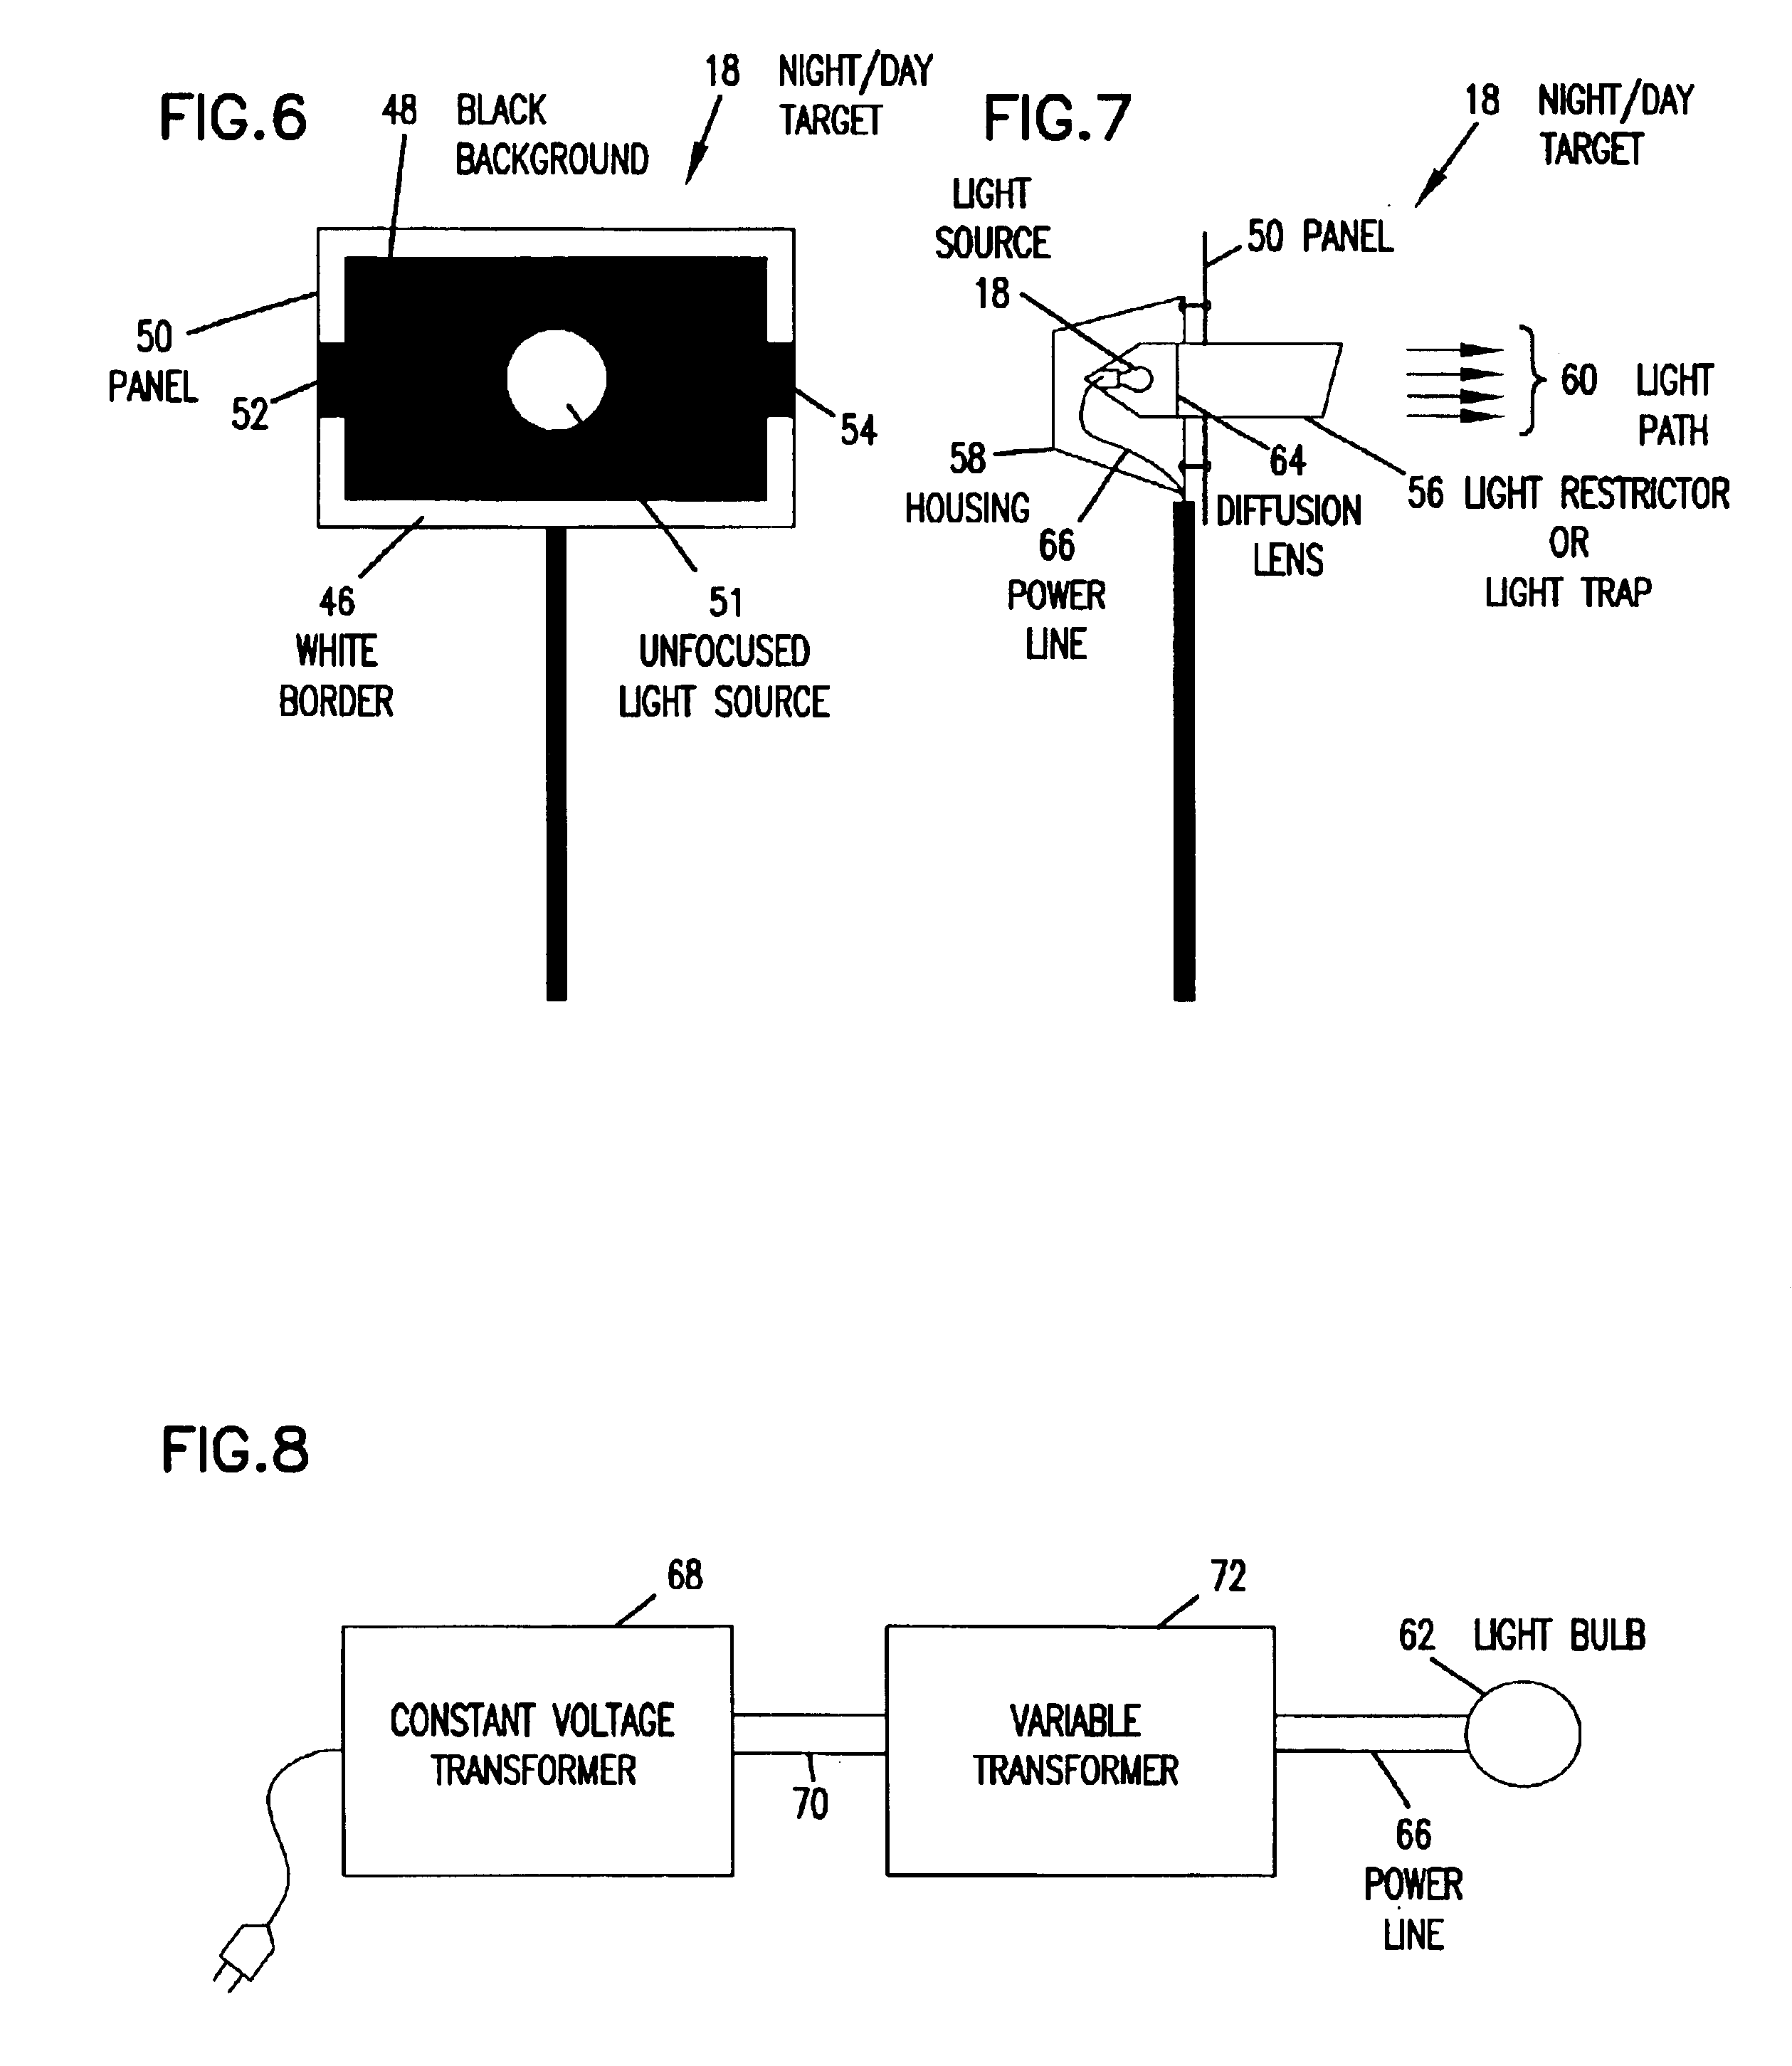 Video camera-based visibility measurement system